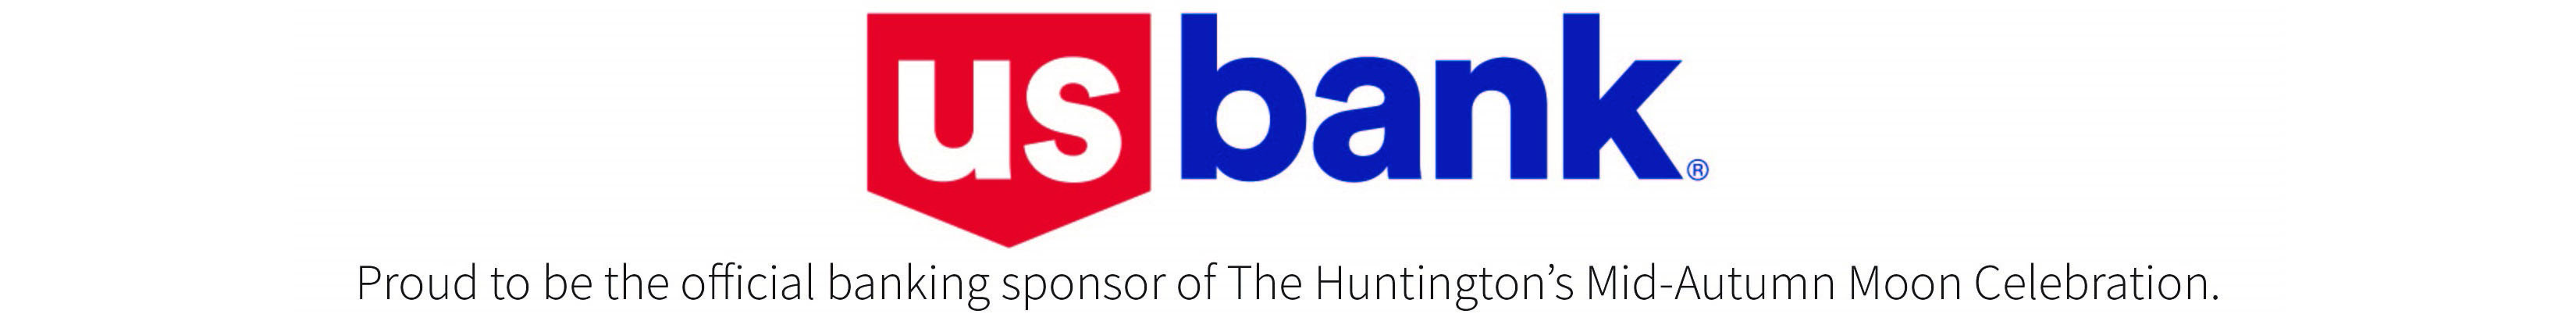 US Bank logo in red, white and blue